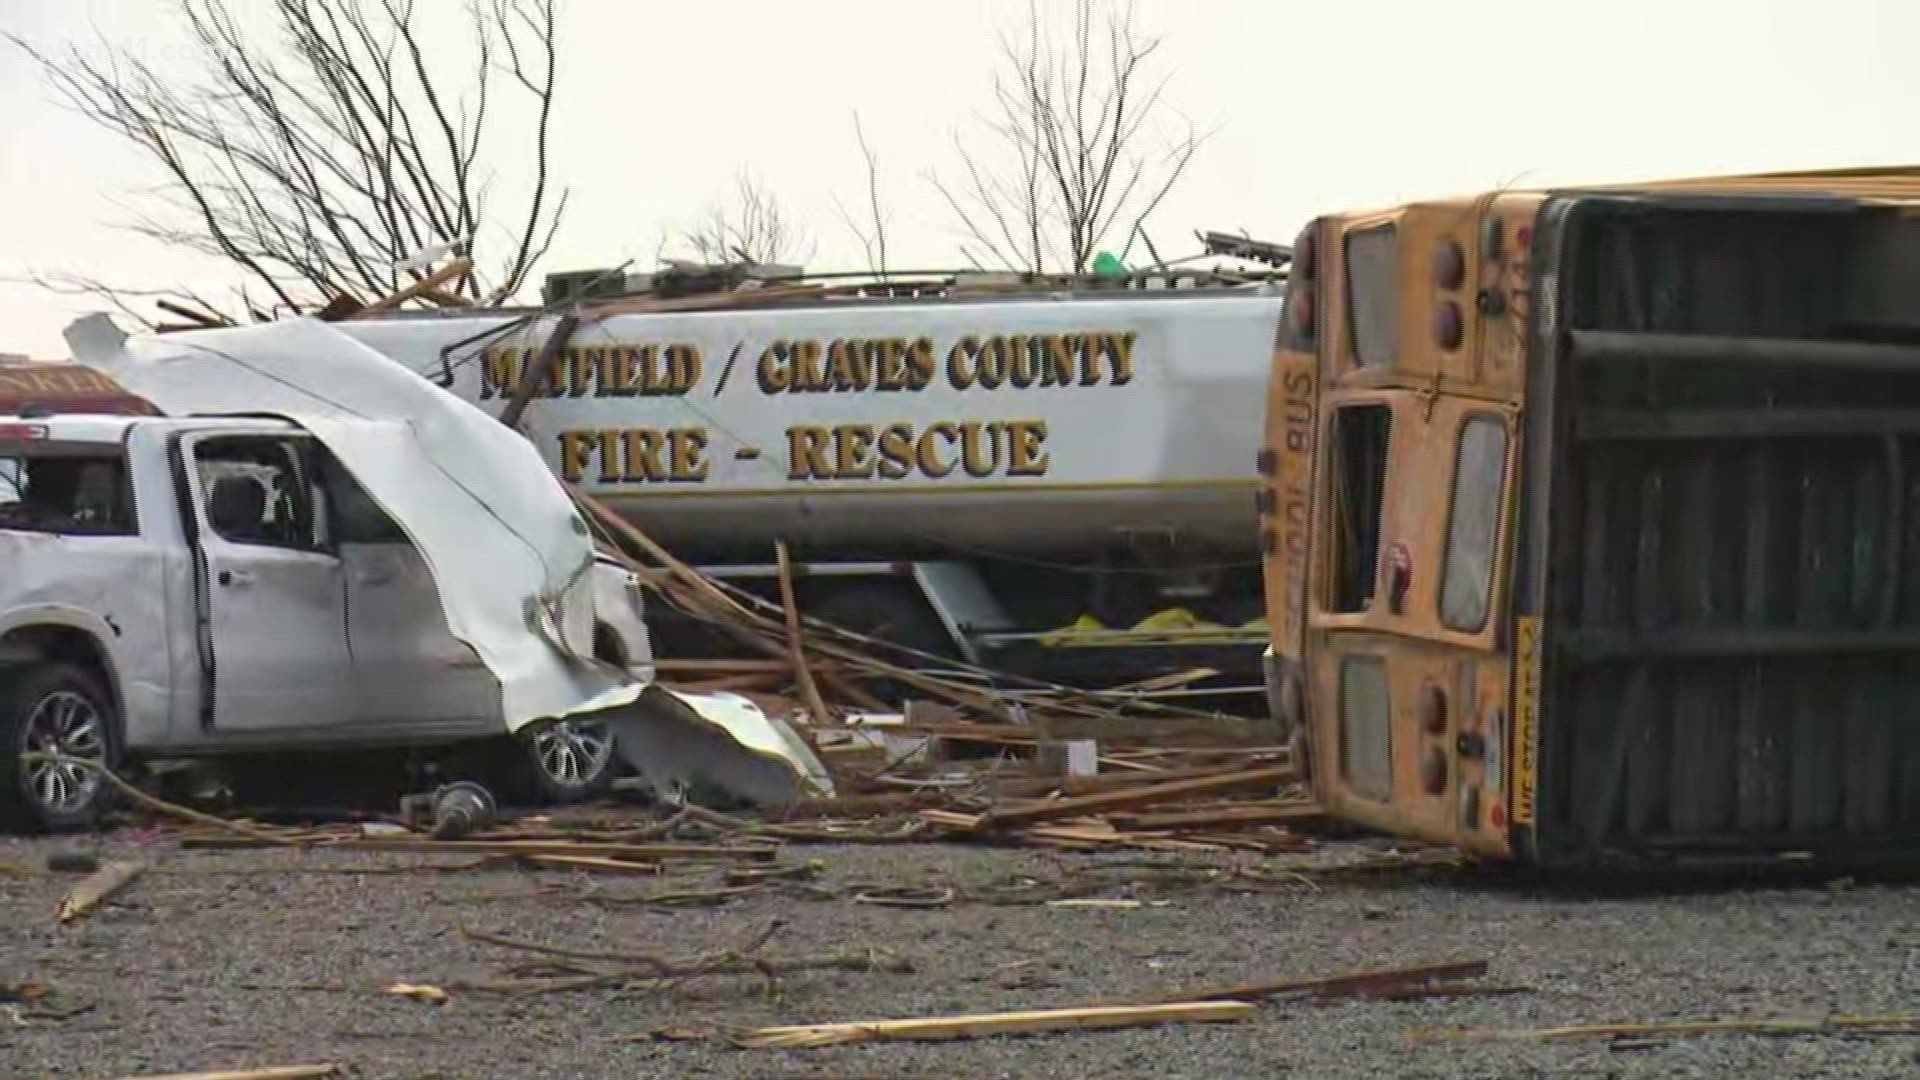 Widespread damage is seen in Mayfield, Kentucky, after a massive tornado ripped through the town on December 11.